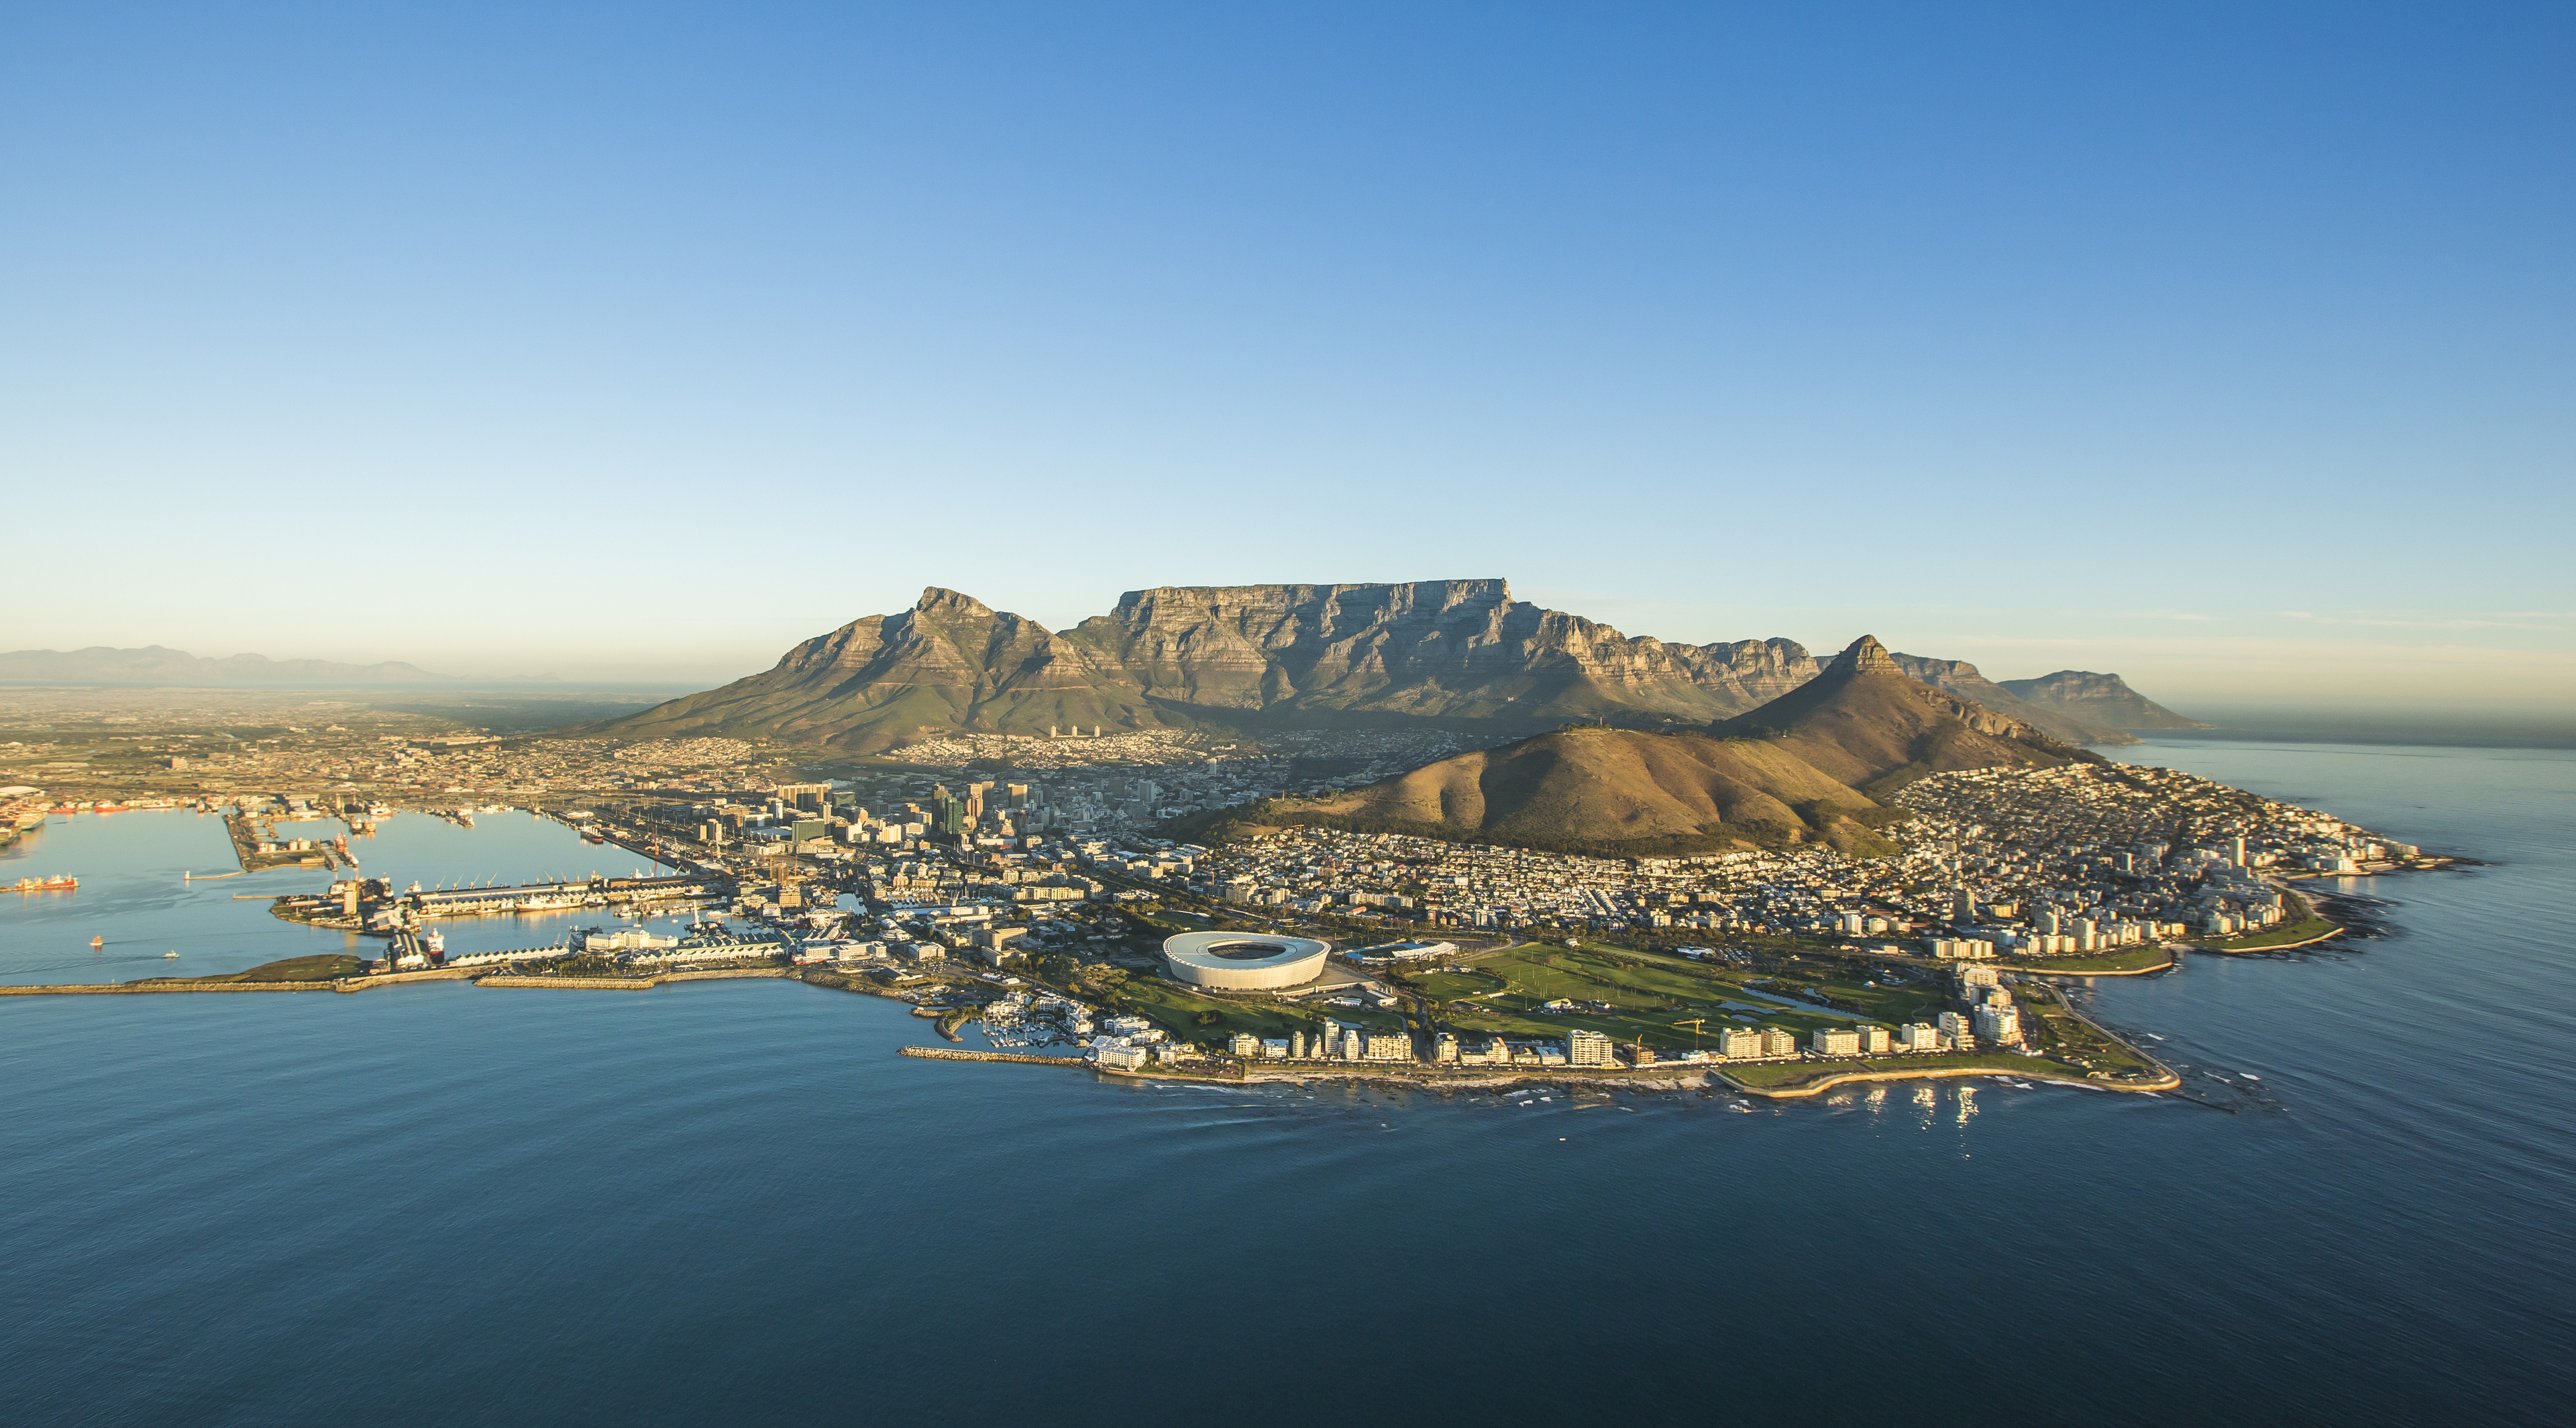 Cape Town was the cheapest long haul UK holiday destination, with Tokyo second and Bali third. (Getty)